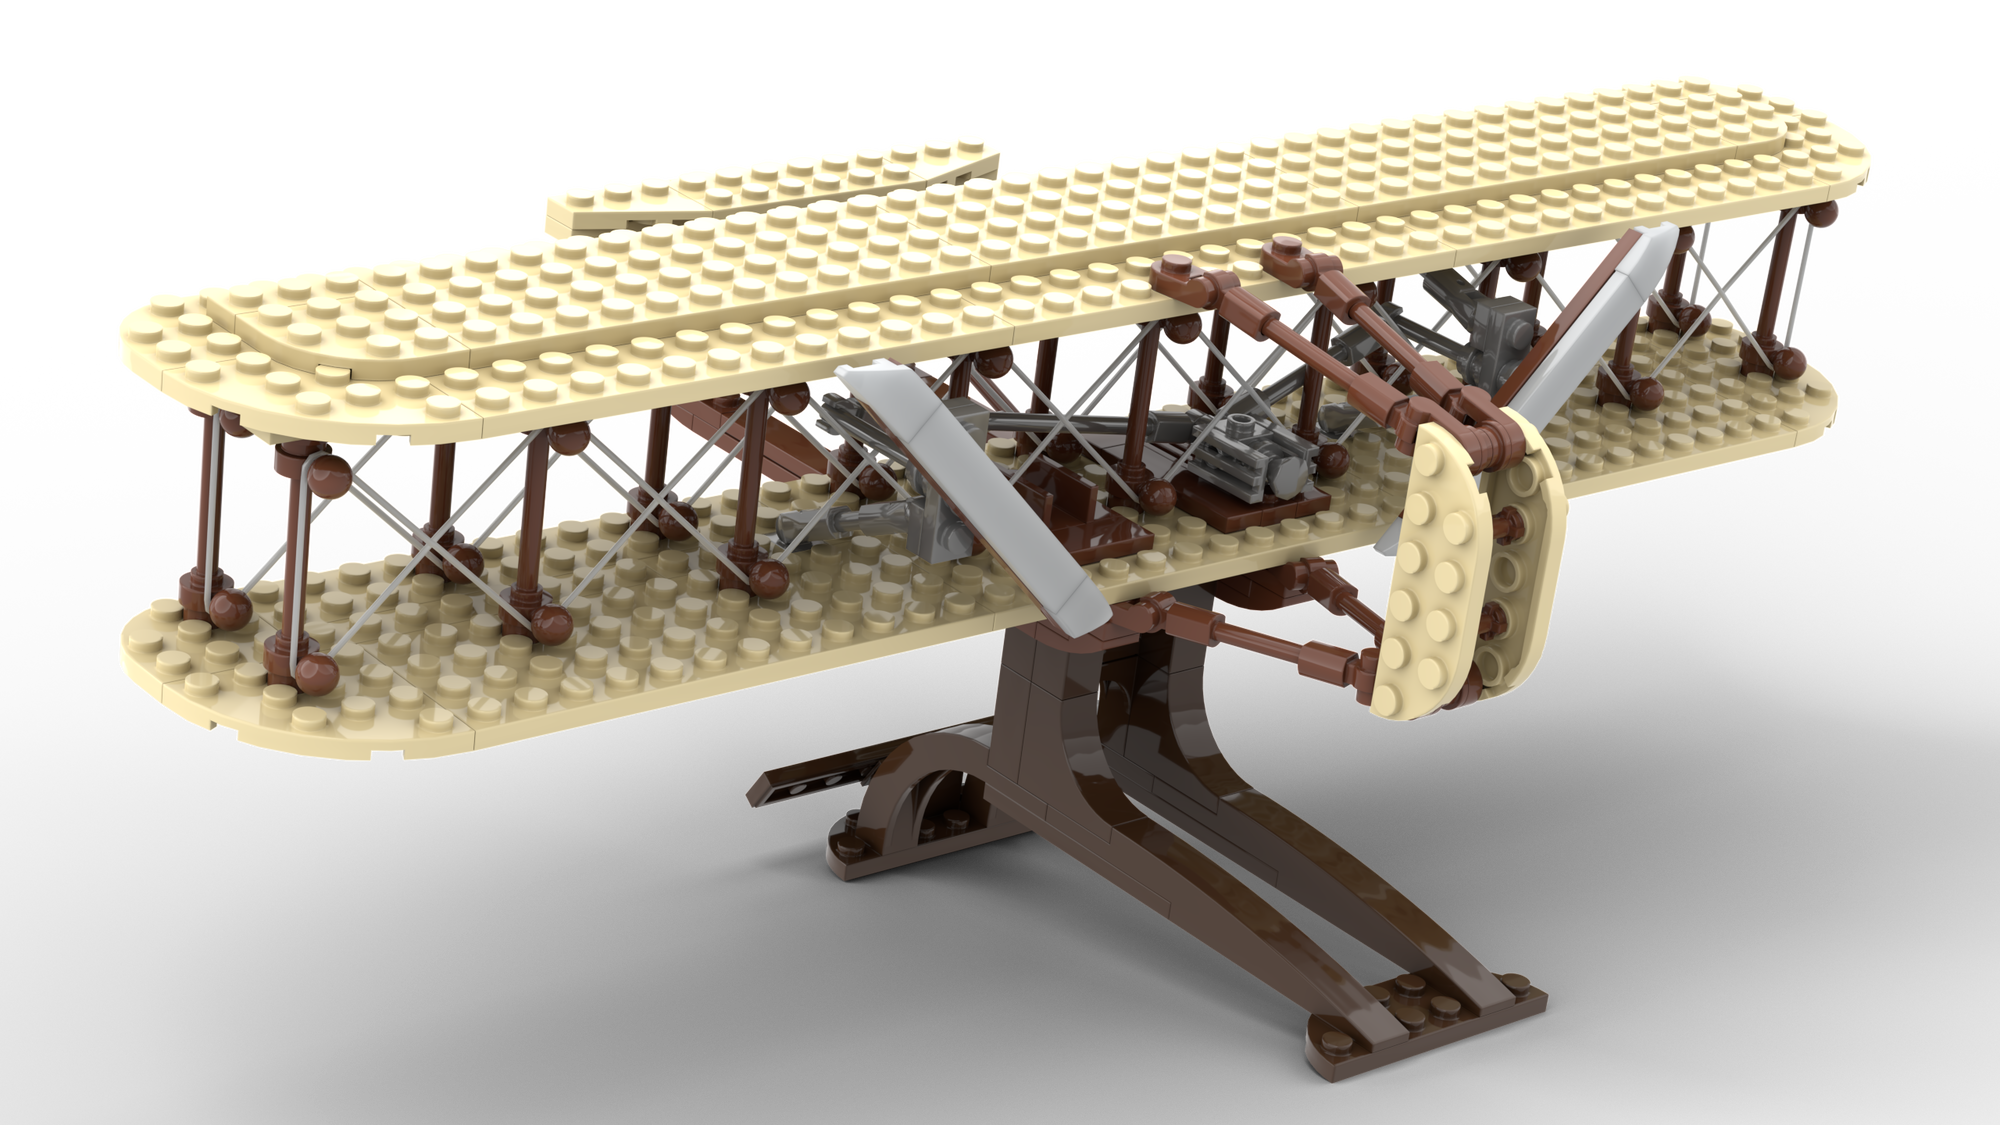 1903 Wright Flyer - The